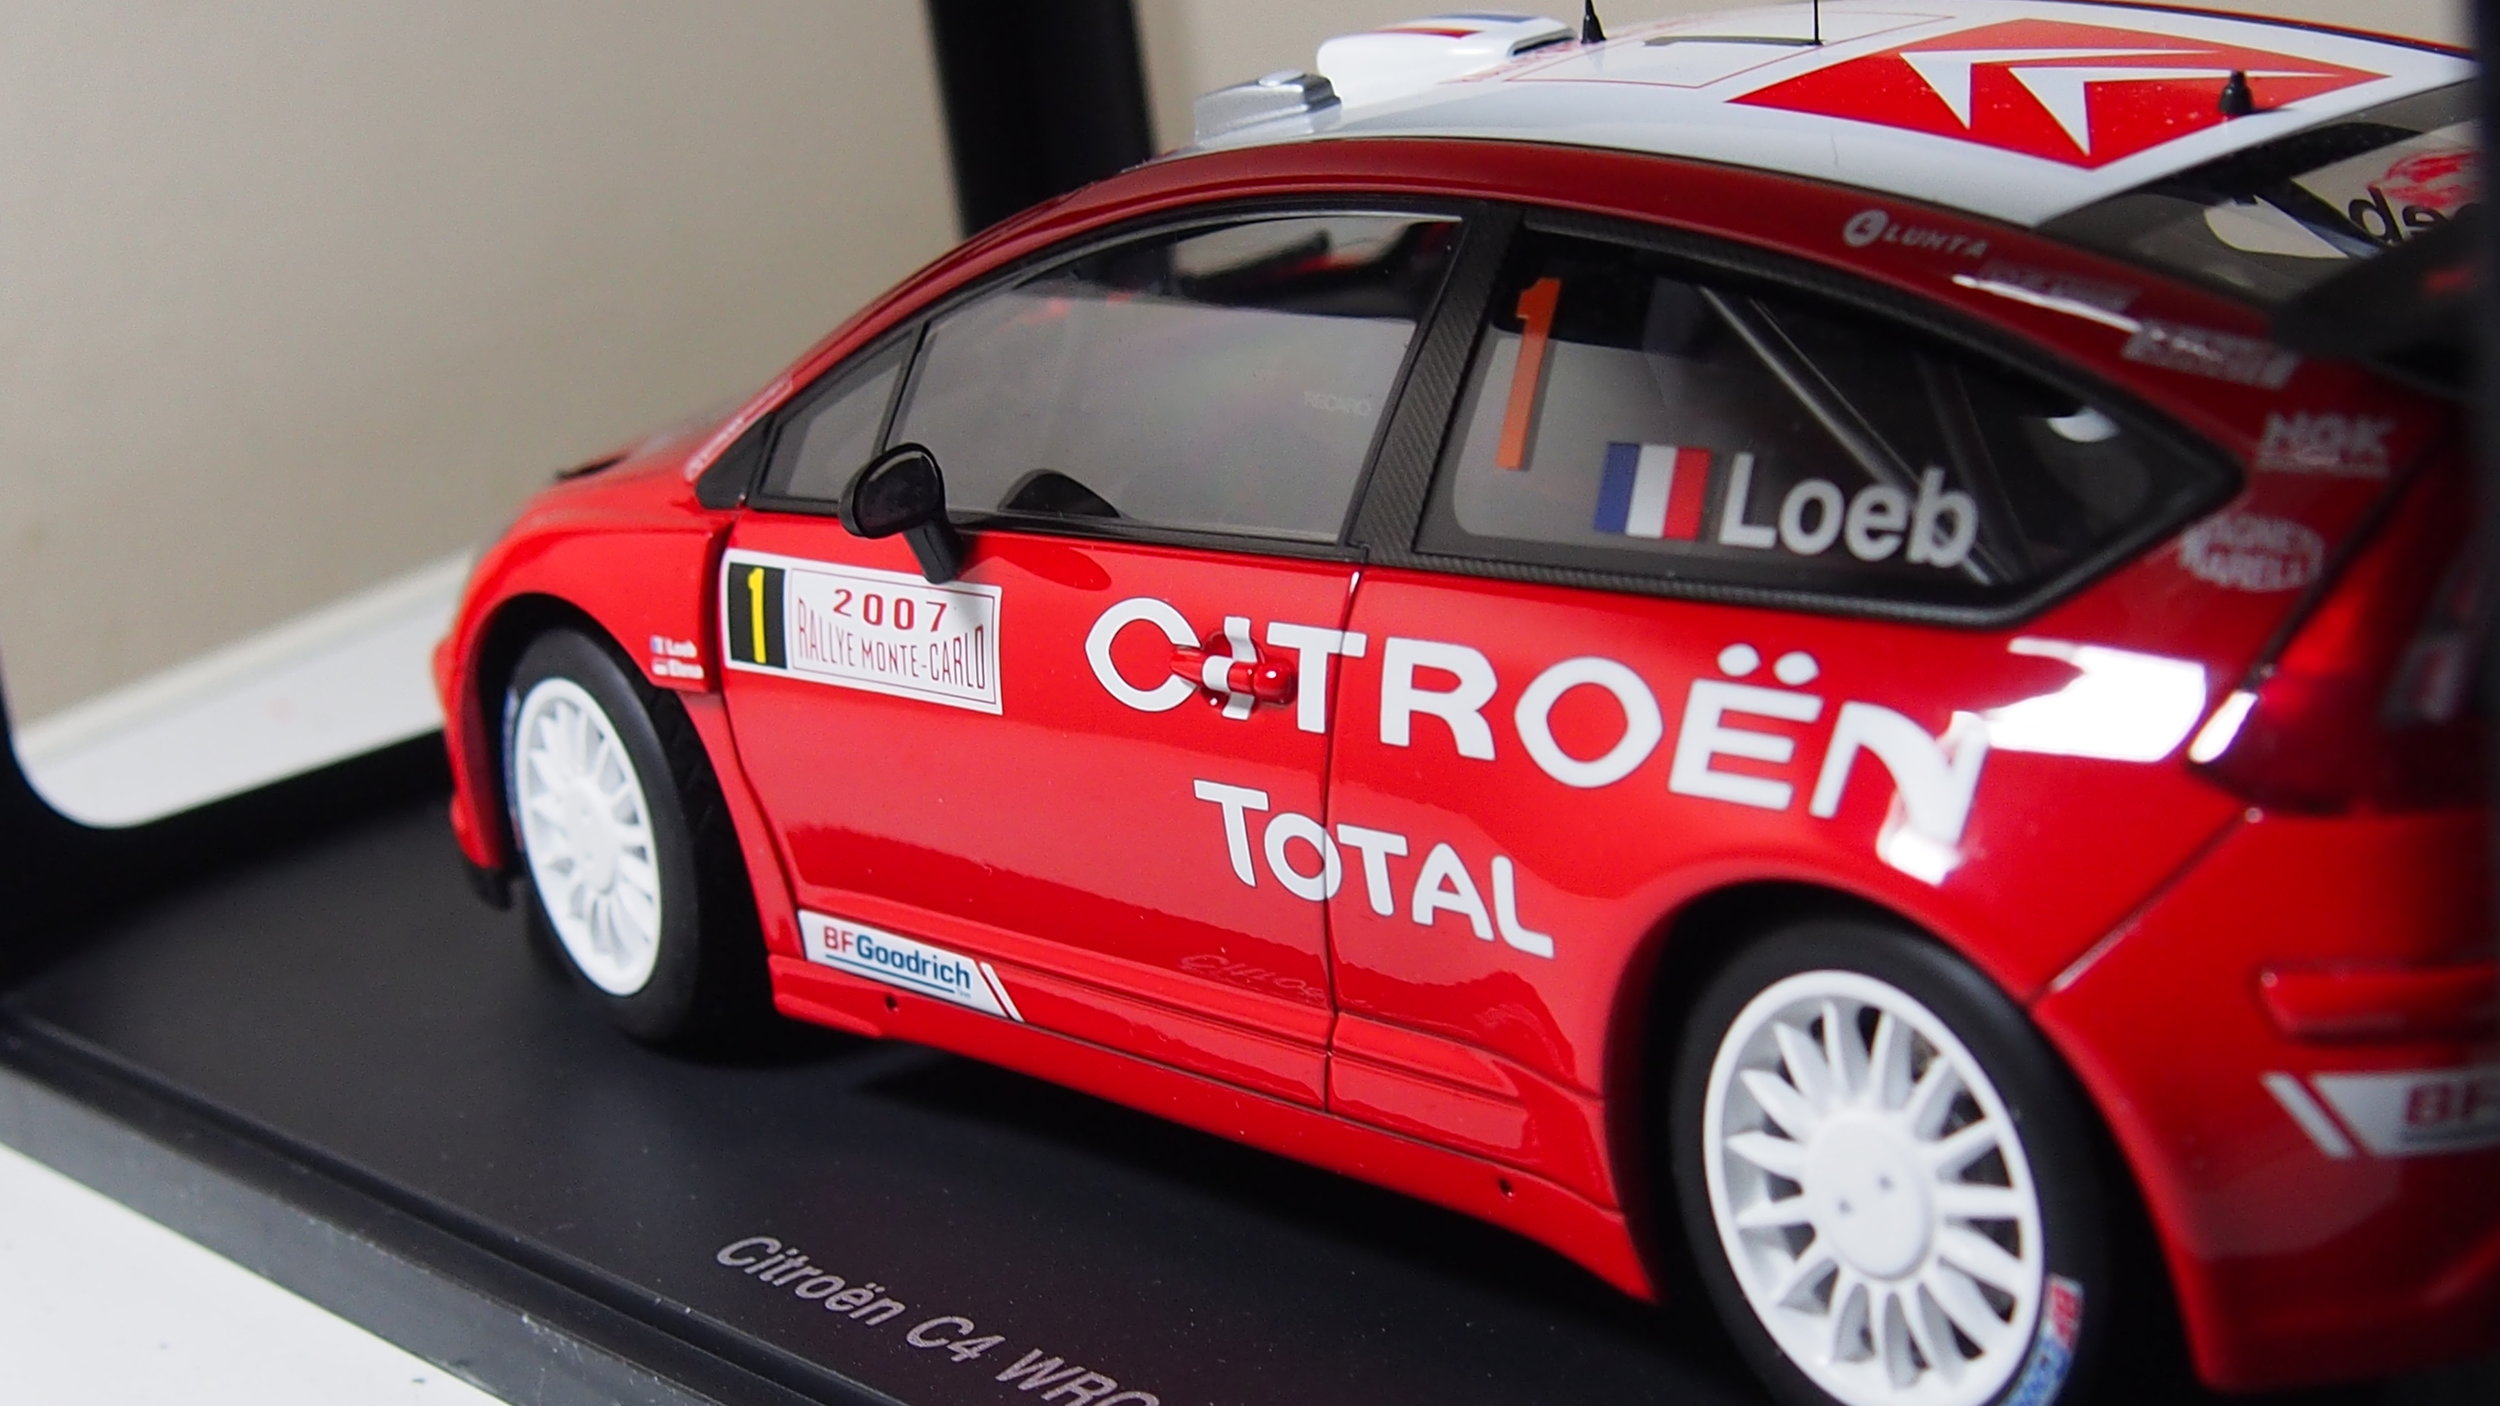 Citroen C4 WRC models by AutoArt limited edition 1:18 scale —  CS-DIECAST-TUNING